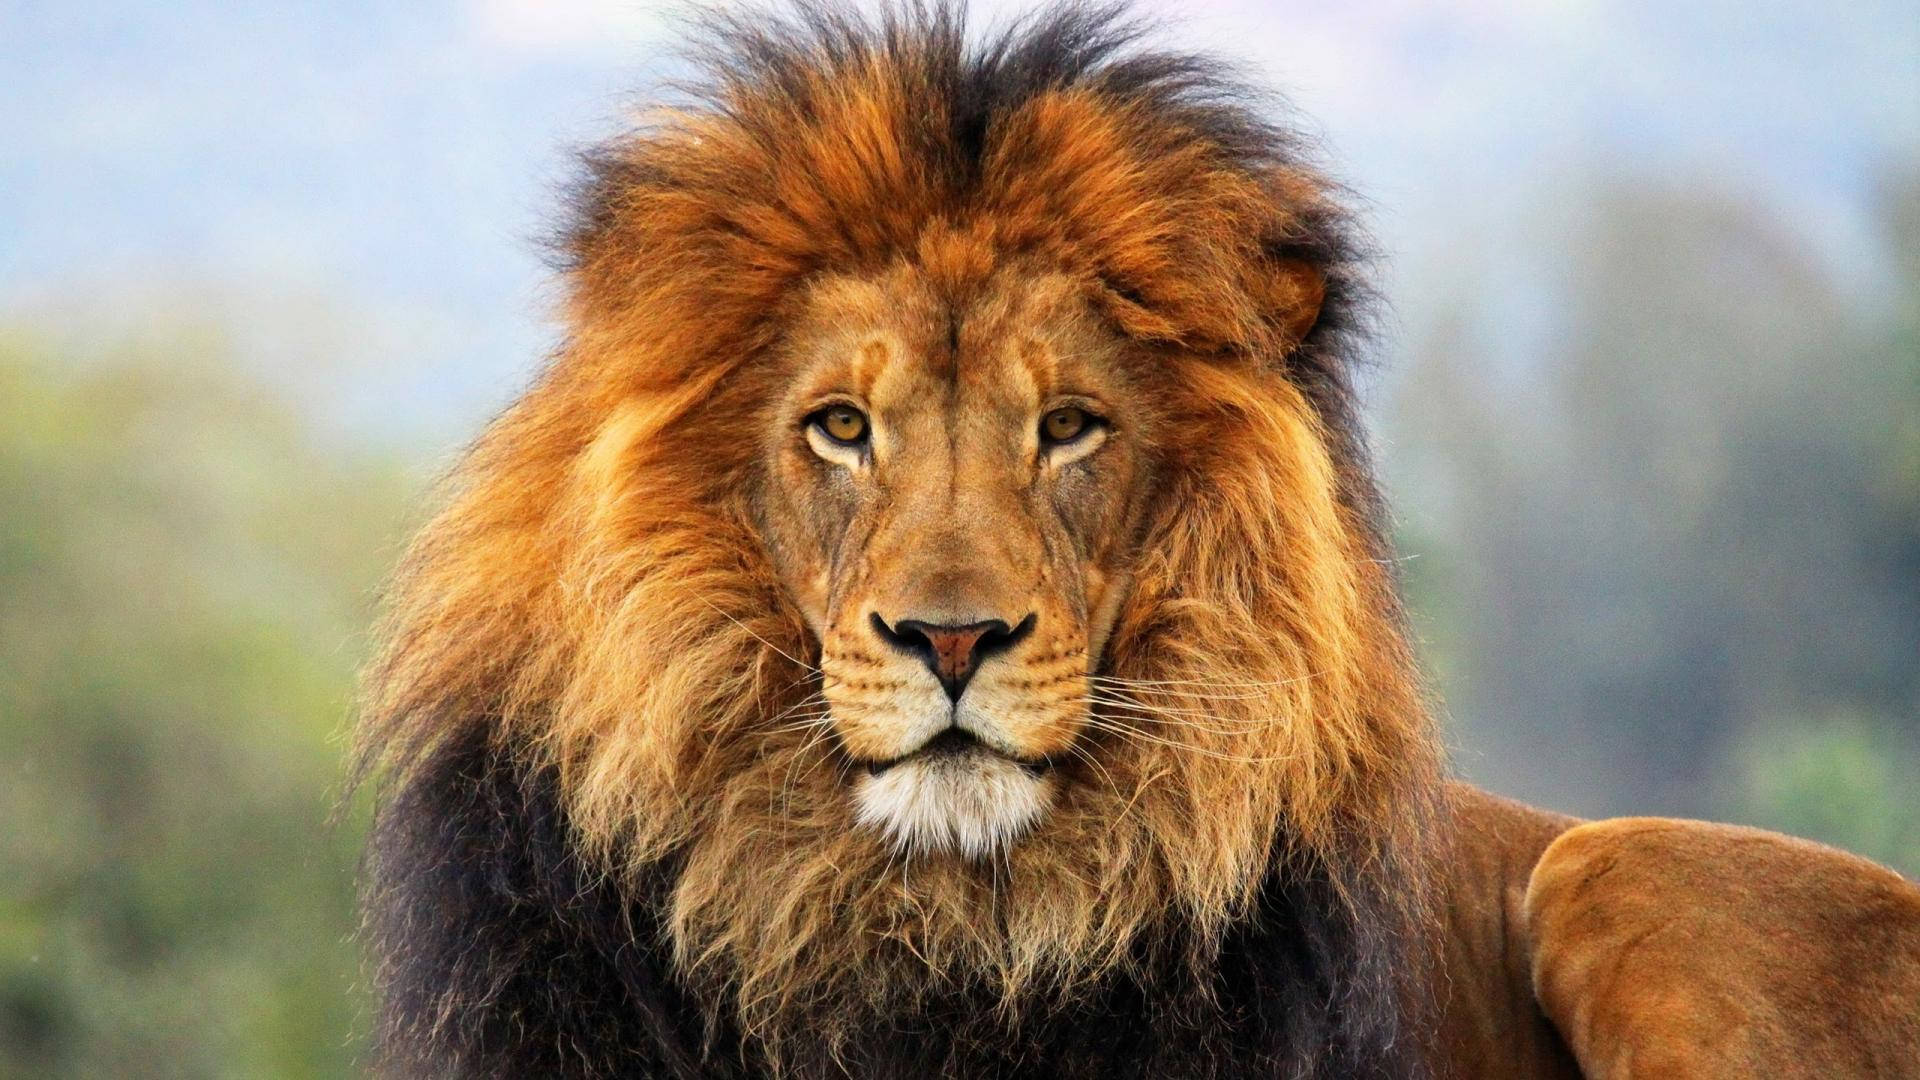 1080p Hd Lion Looking Forward Background